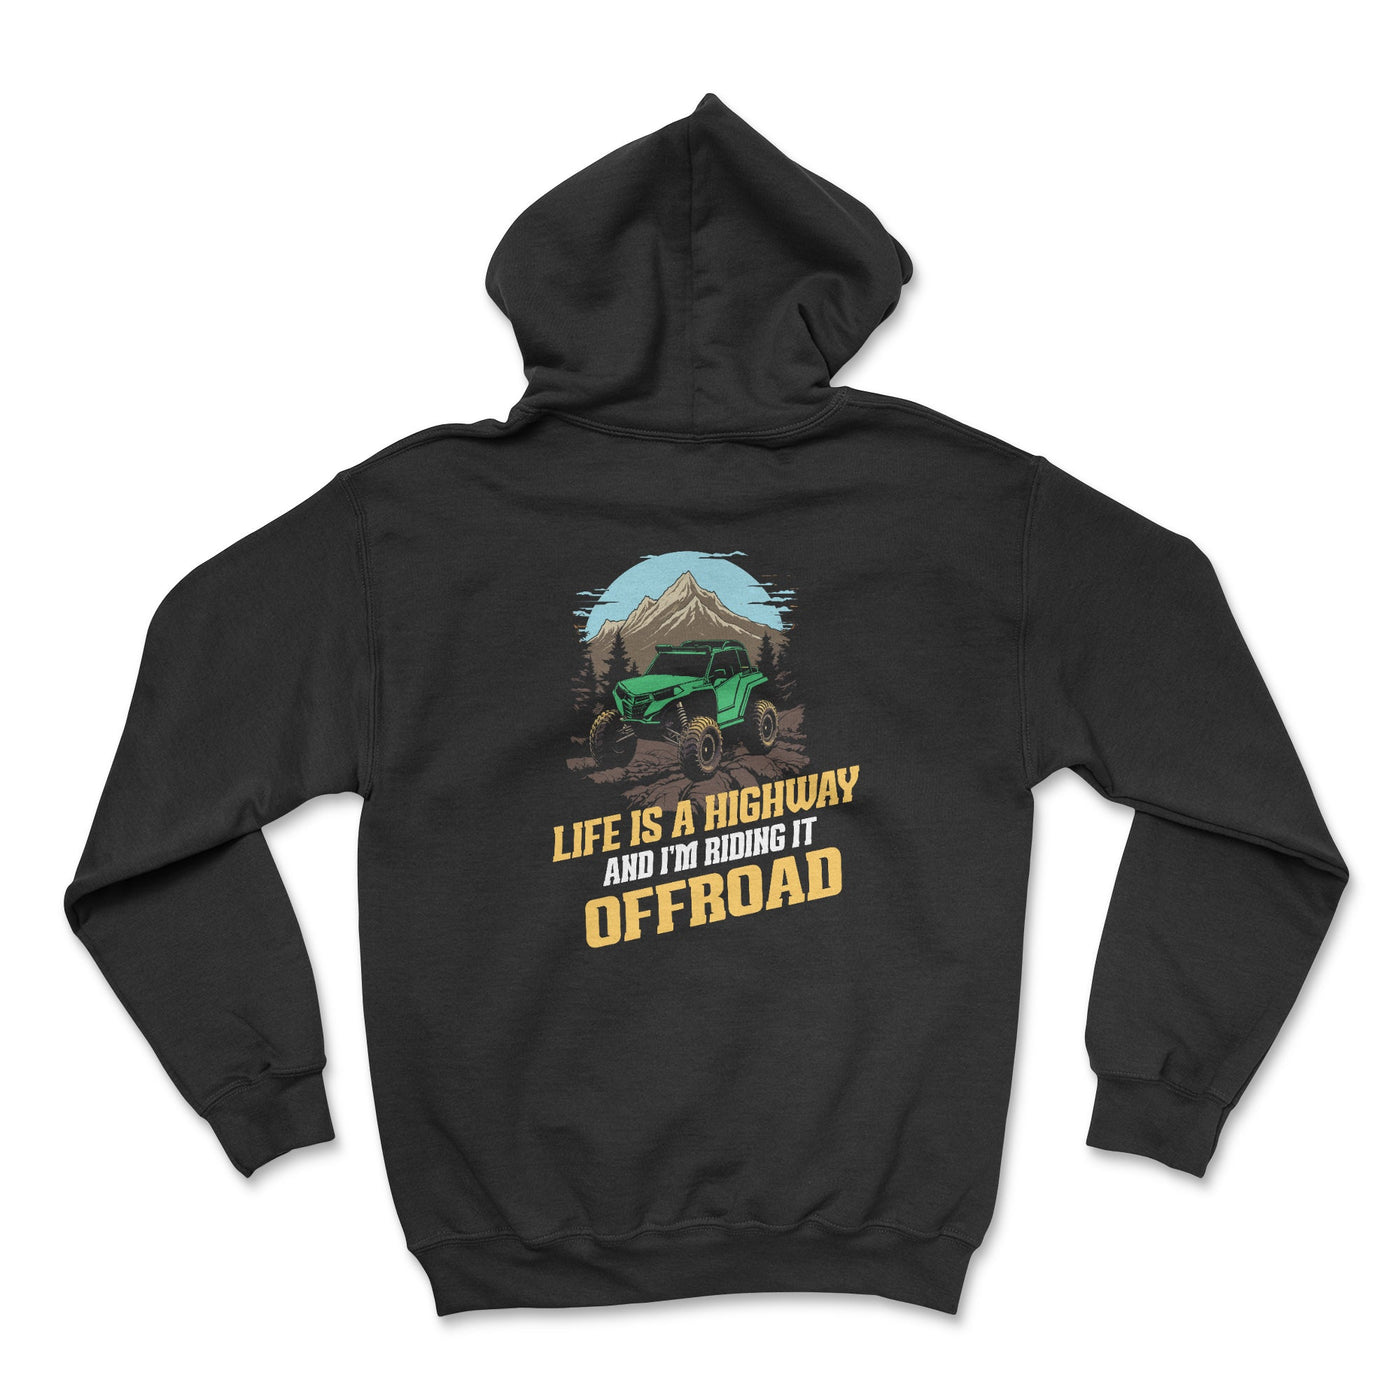 Living Life Off-Road SXS Zip-Up Hoodie - Goats Trail Off-Road Apparel Company